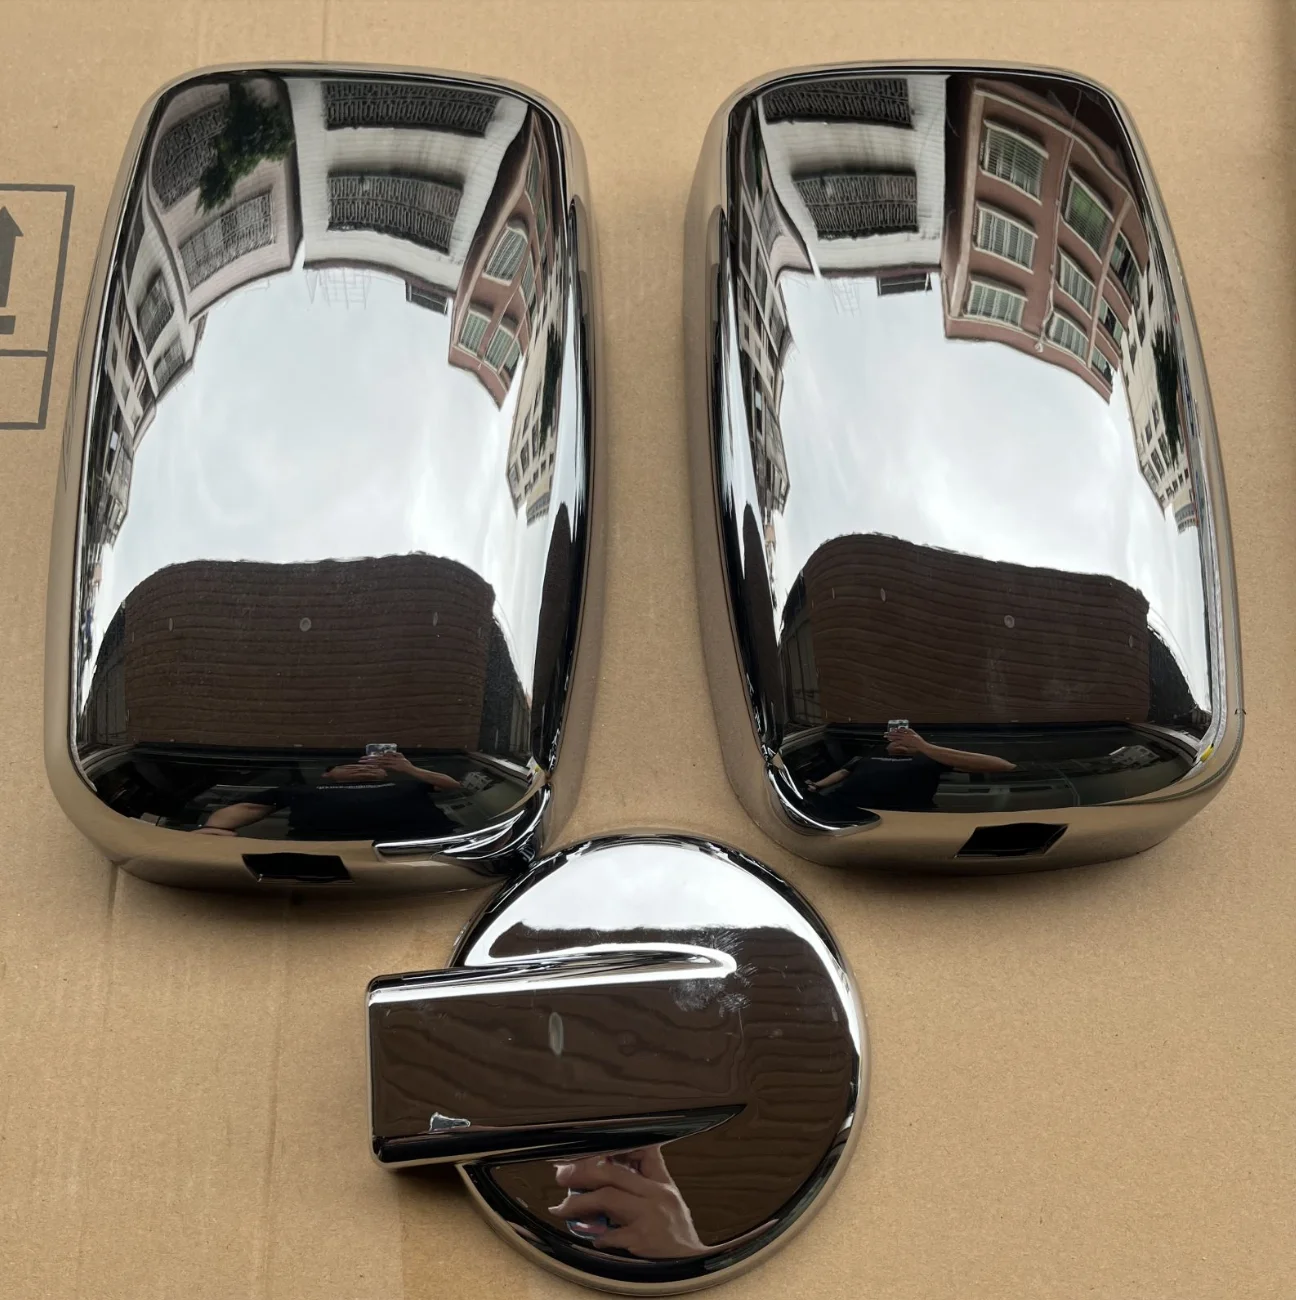 

HIGH QUALITY ELECTROPLATED CHROME REAR VIEW MIRROR COVER FOR ISUZU 600P ELF BODY PARTS